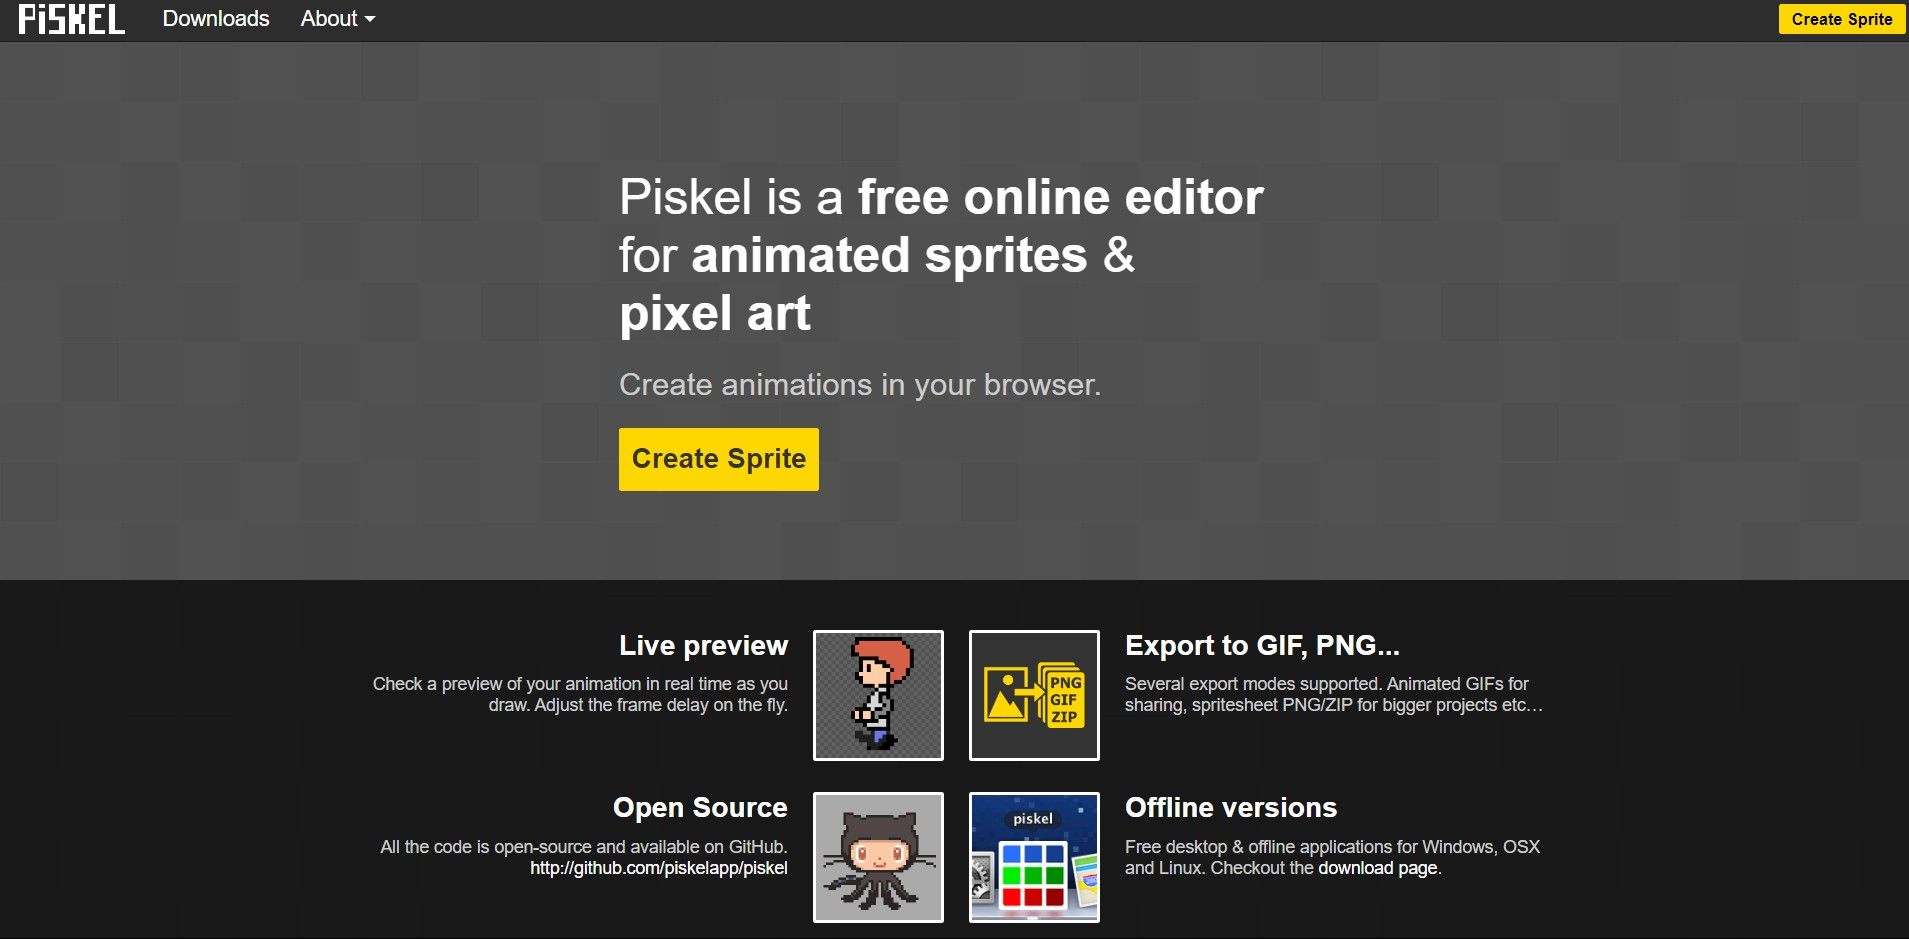 The interface of Pixel to create Pixel Art